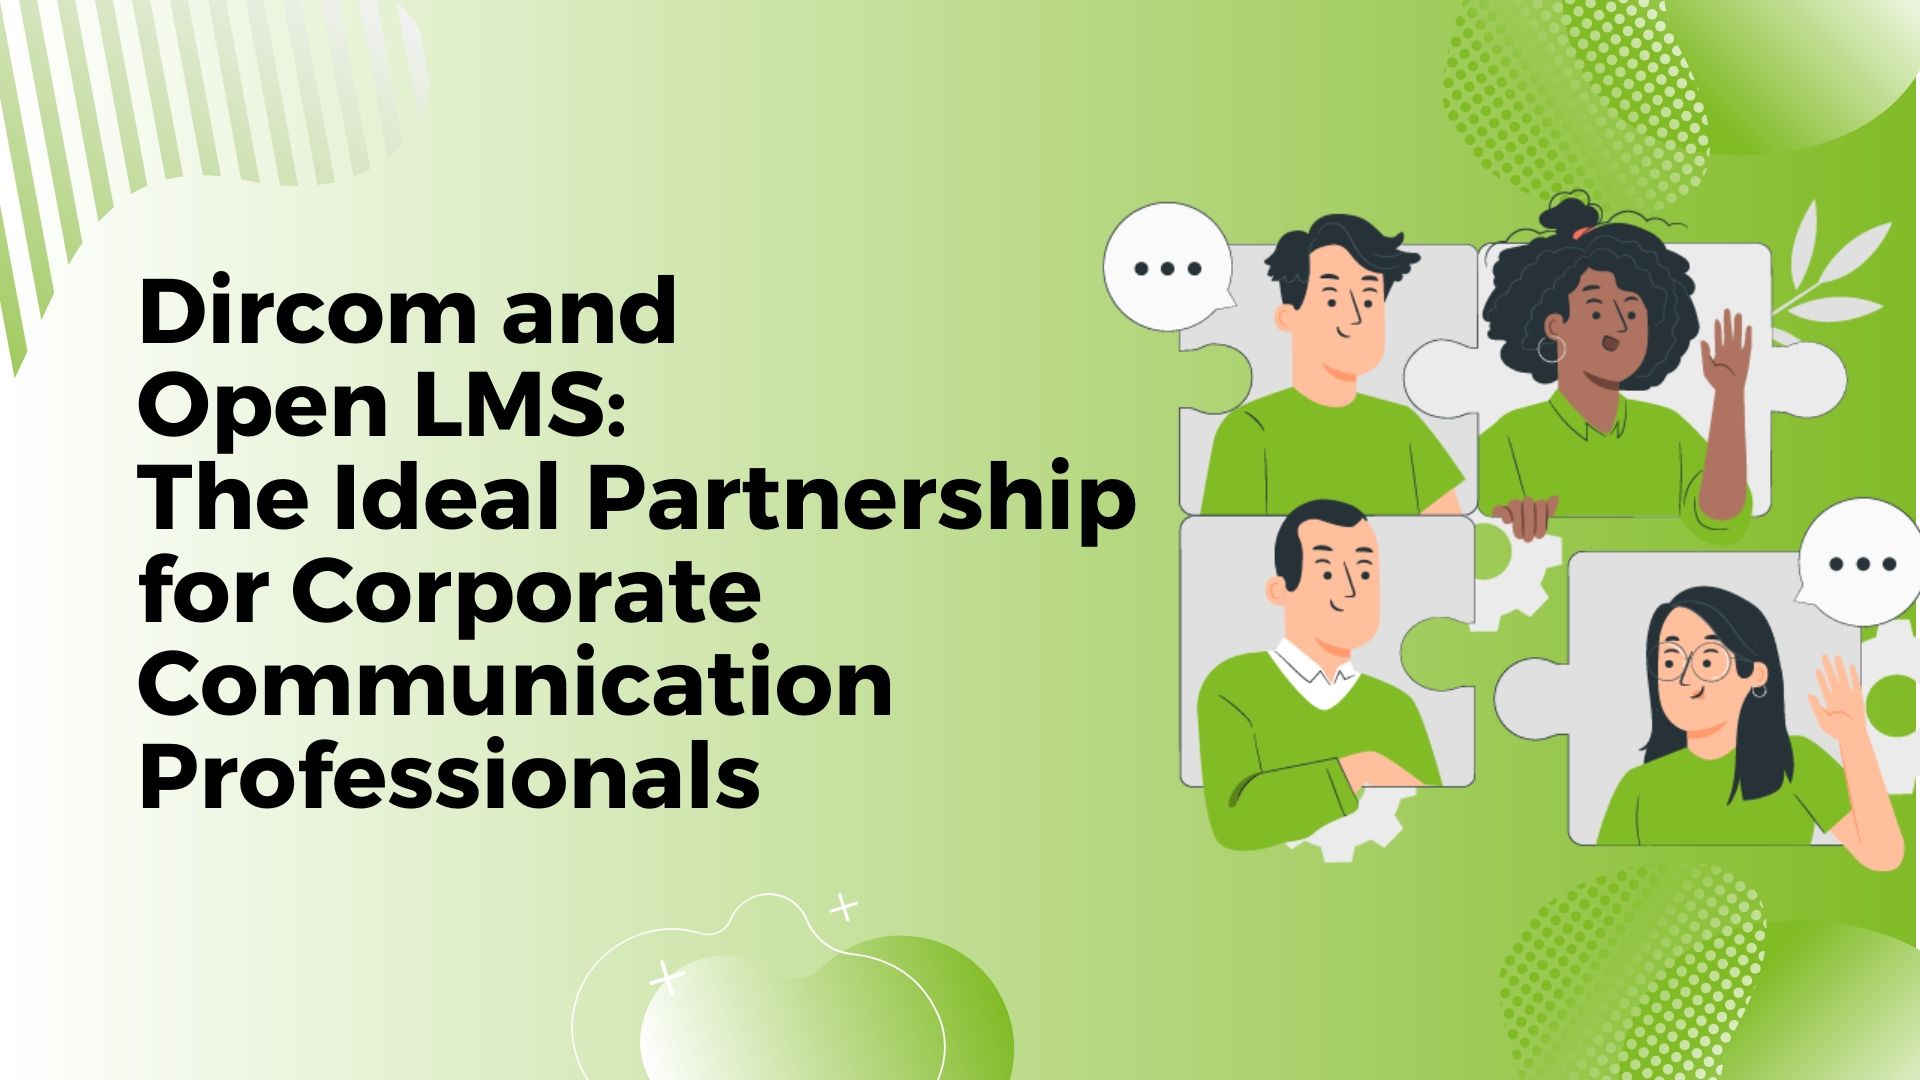 Dircom and Open LMS: The Ideal Partnership for Corporate Communication Professionals